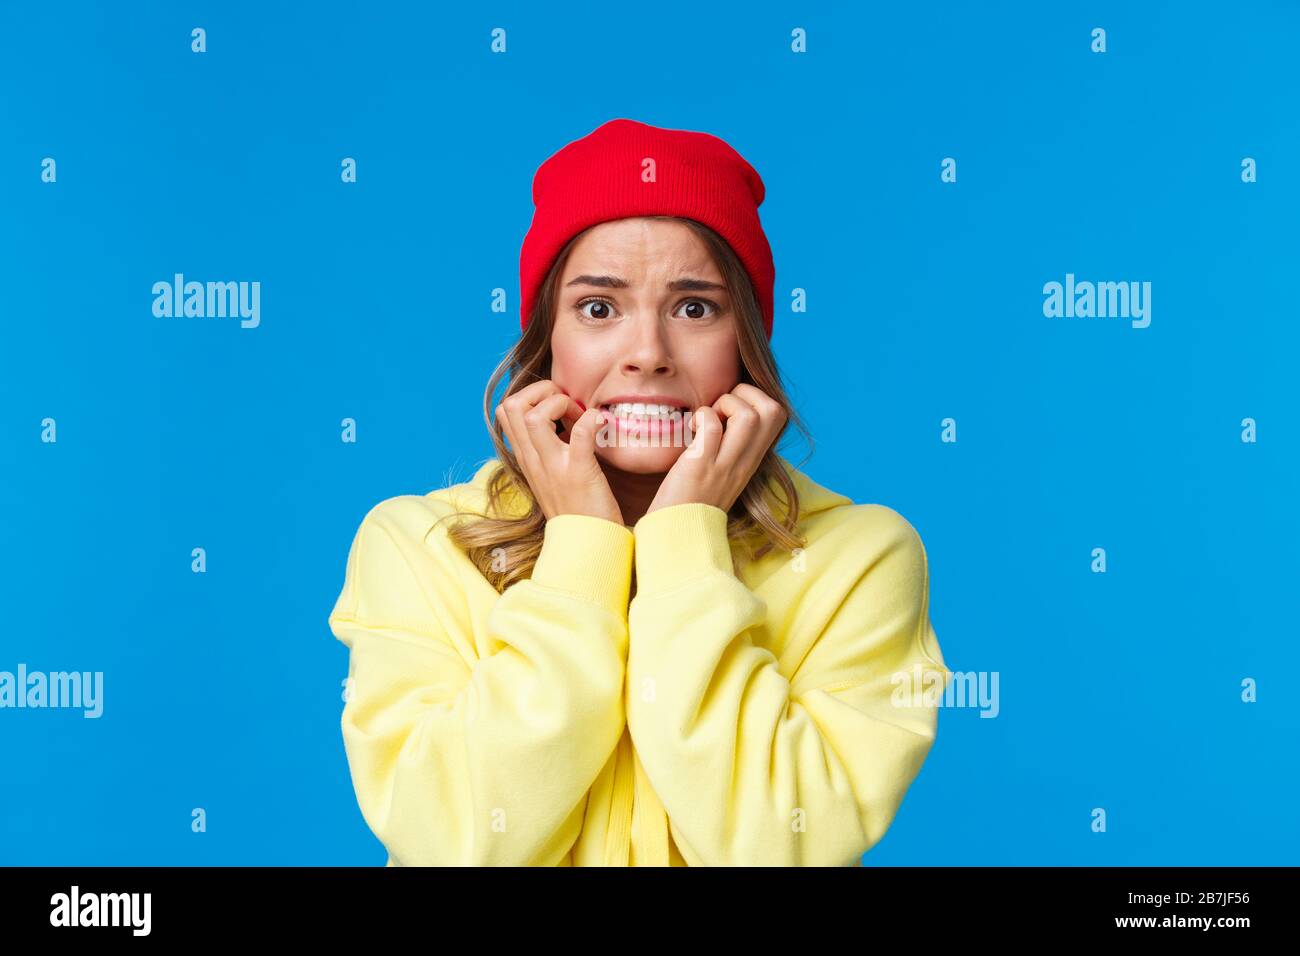 Close-up portrait of scared and insecure cute troubled caucasian girl in red beanie, biting fingernails and frowning concerned, look afraid and worrie Stock Photo